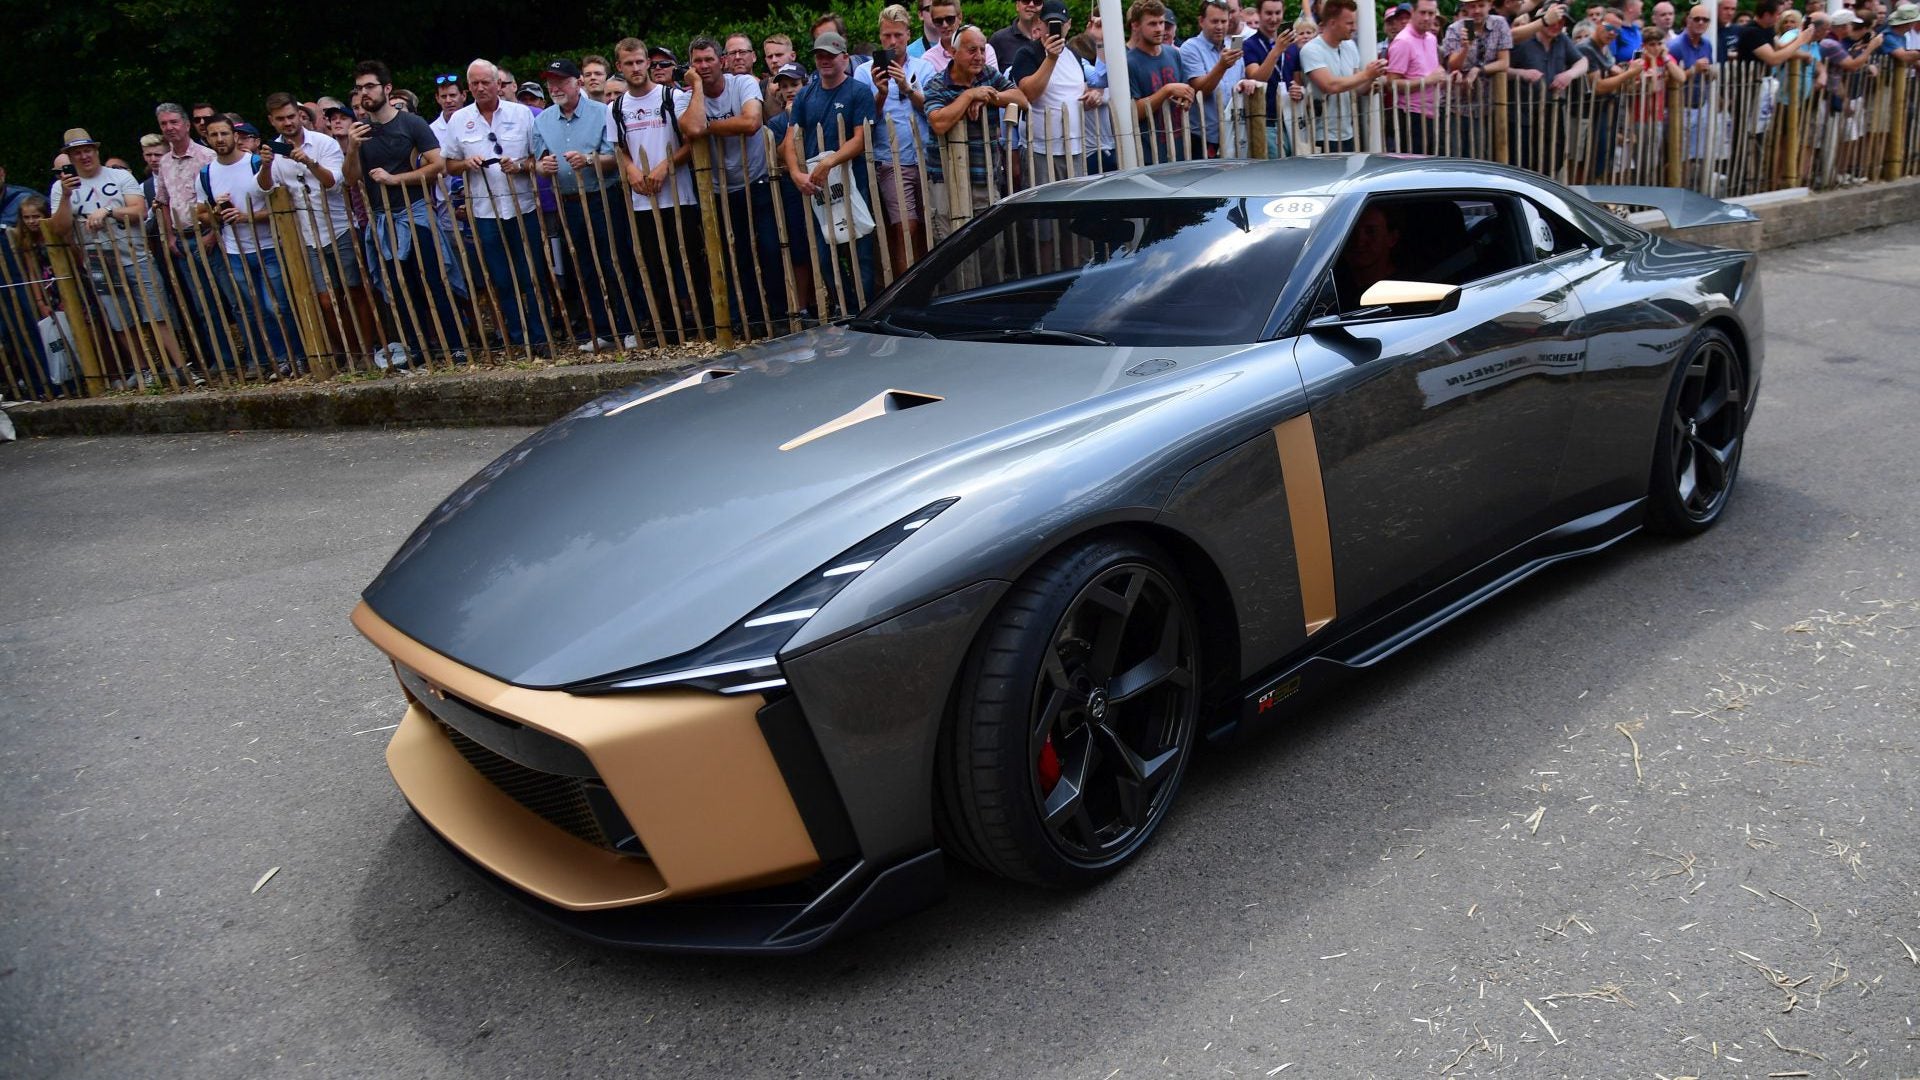 Nissan Says Next GT-R Will Be the ‘Fastest Super Sports Car in the World’